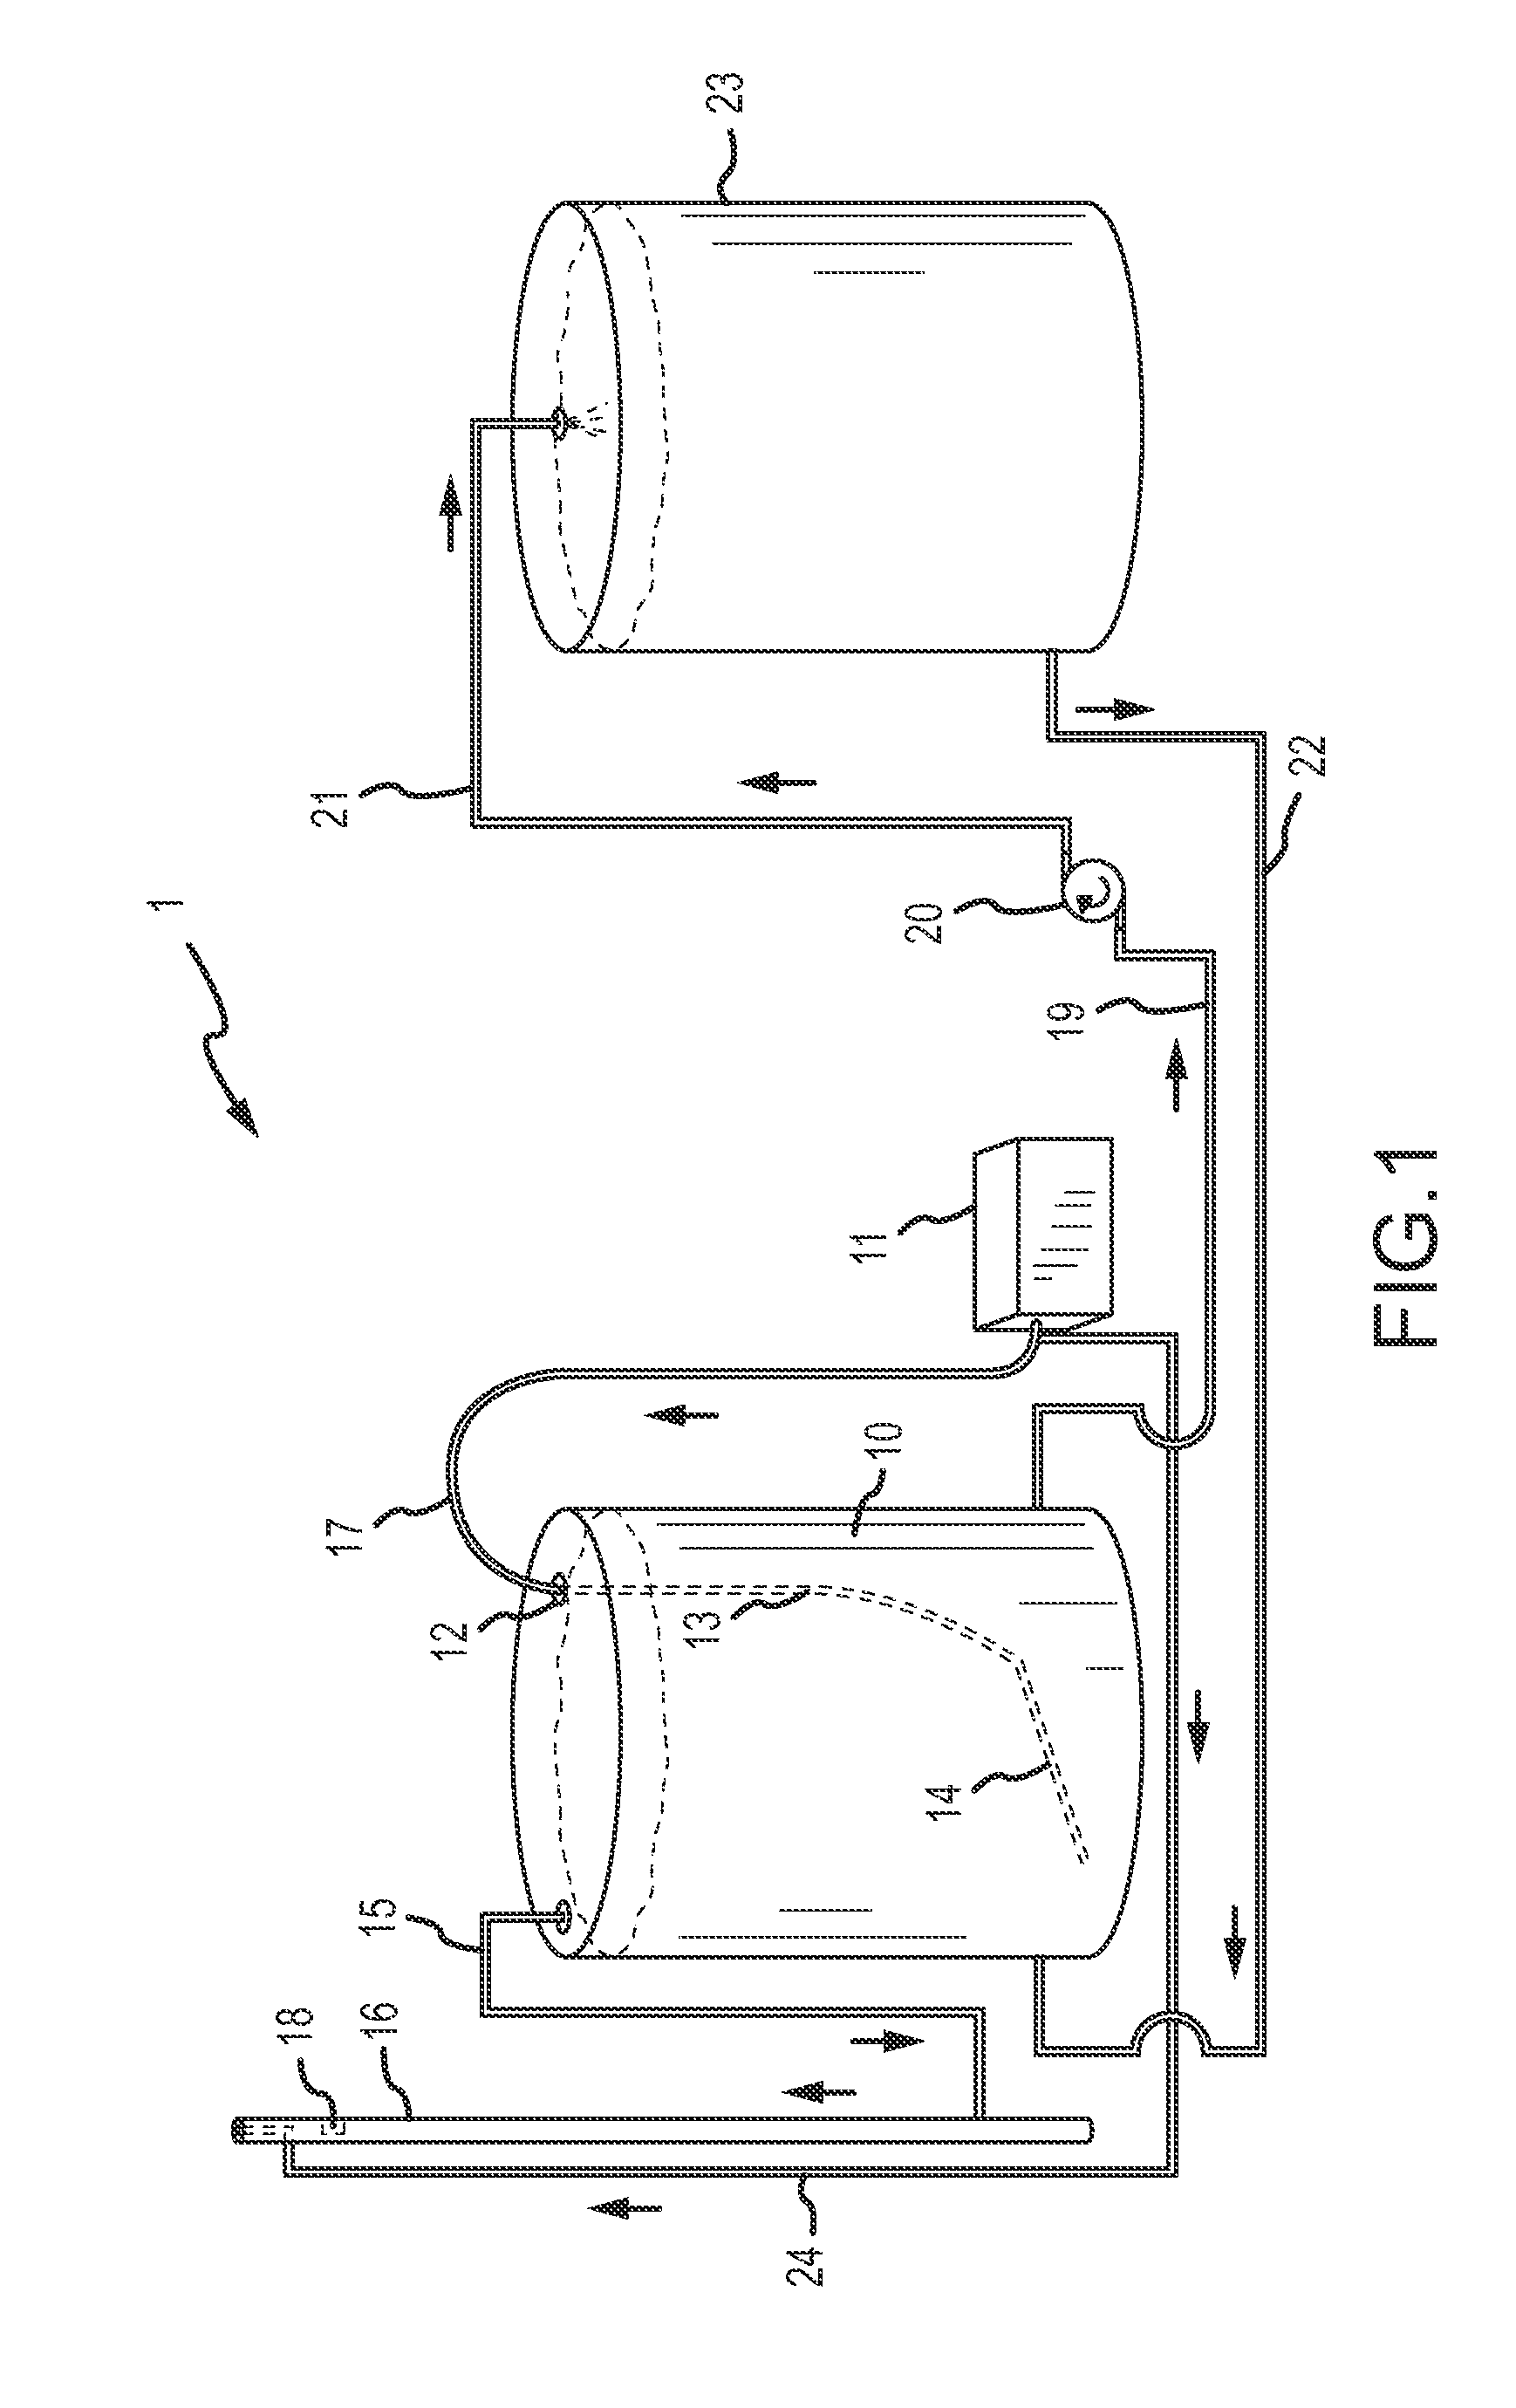 Method and system for removing hydrogen sulfide from sour oil and sour water